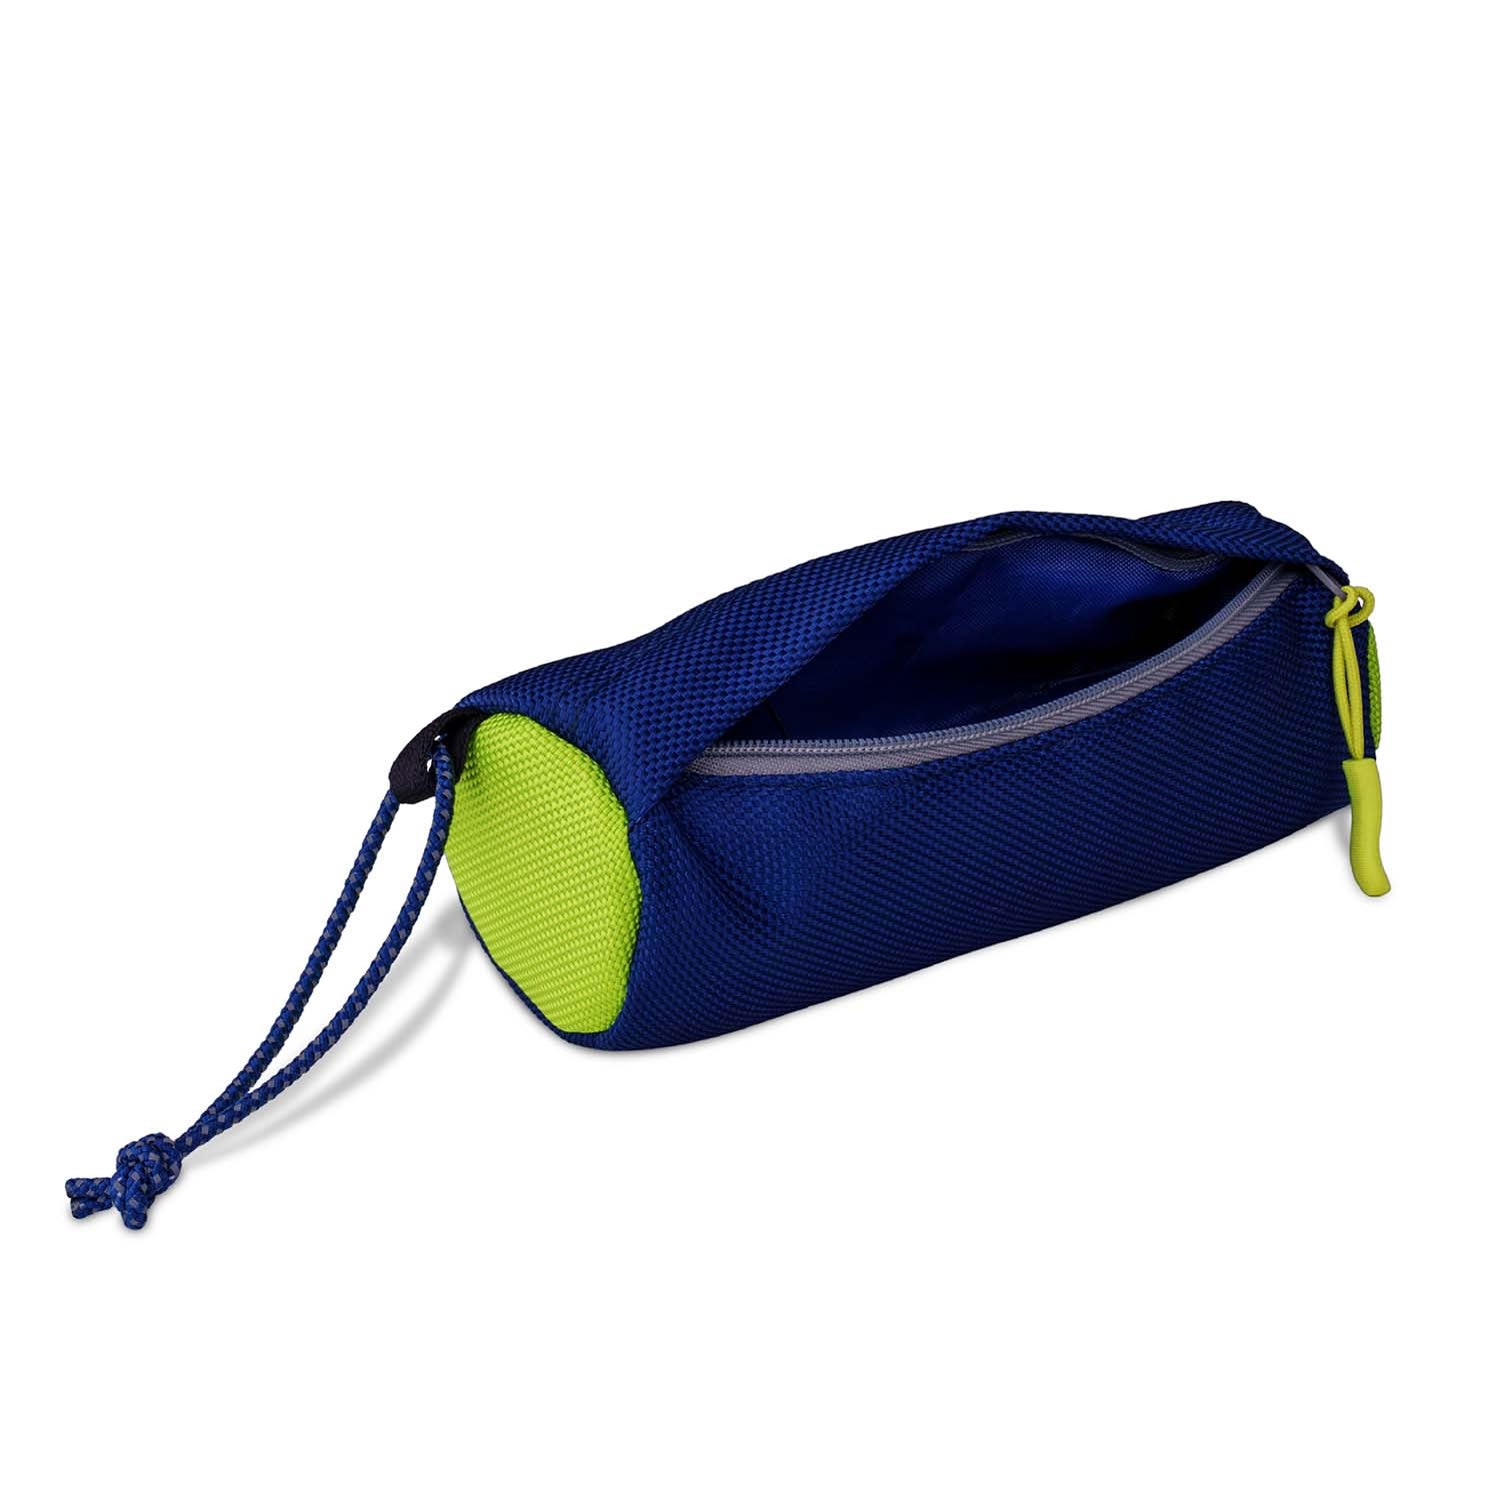 Coachi Fetch & Reward Navy/Lime For Dogs & Puppies